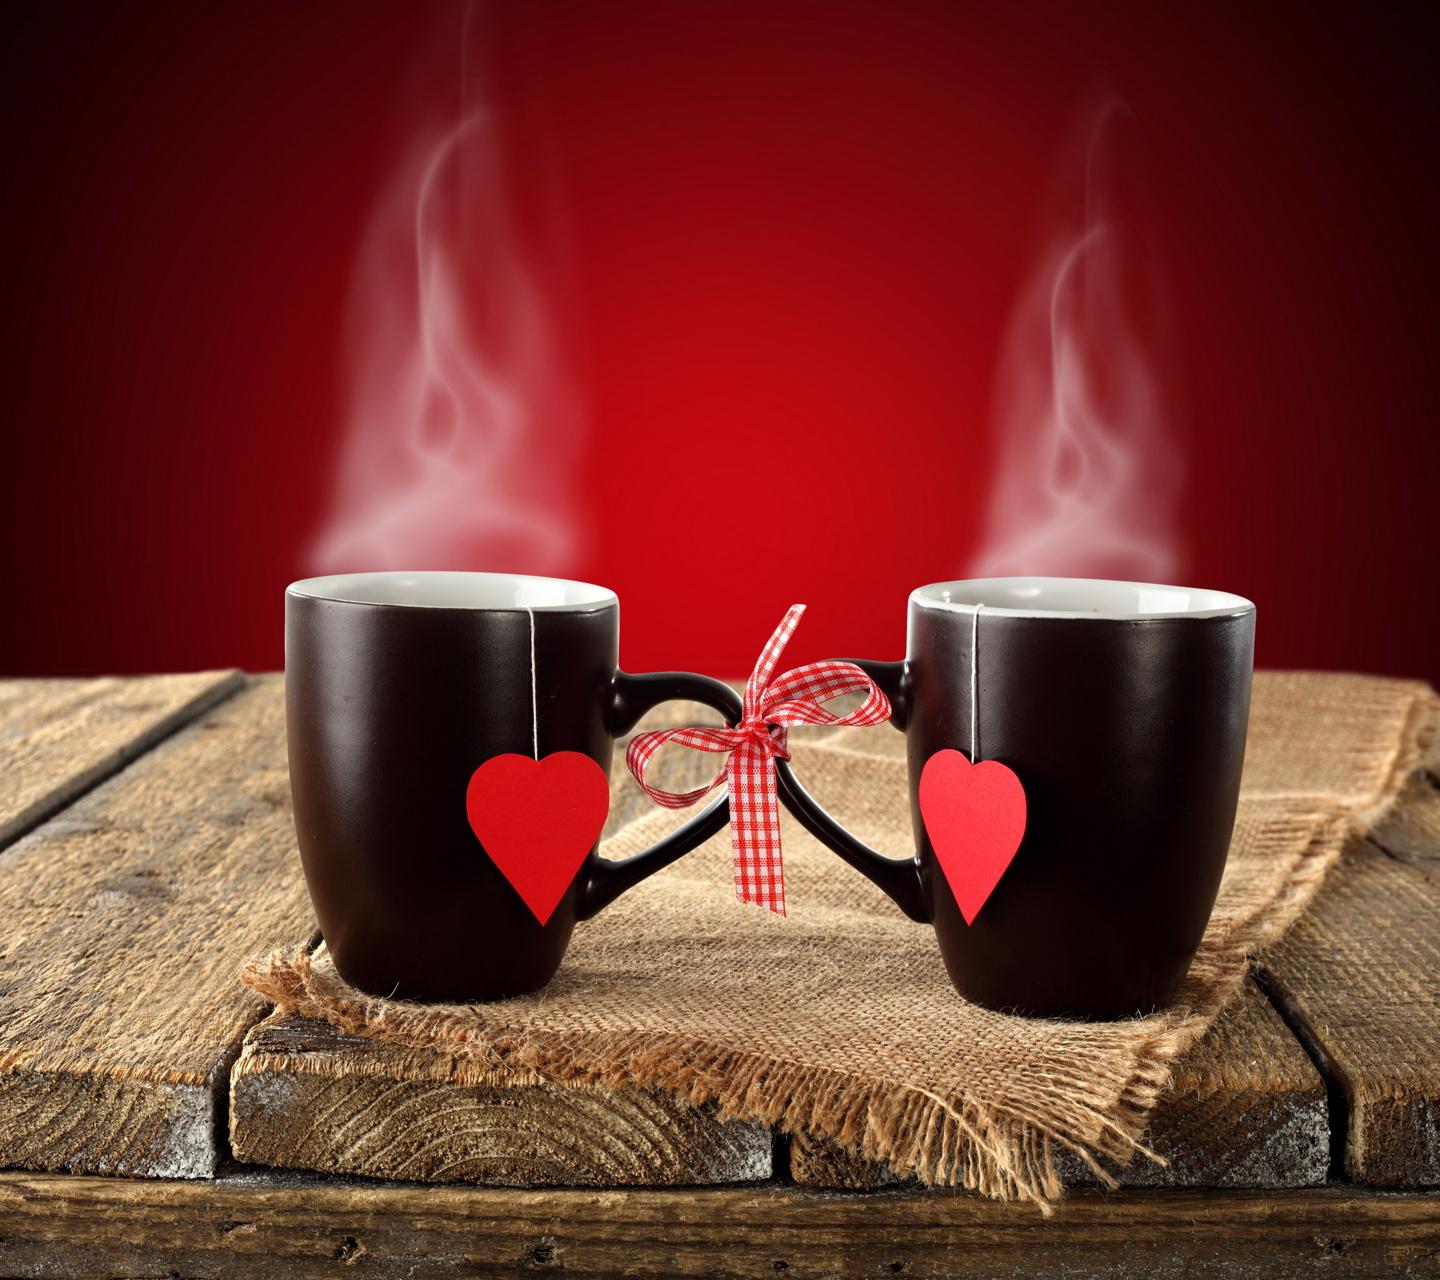 Download Love cups hd wide wallpaper for laptop - Nature hd laptop  wallpapers for your mobile cell phone